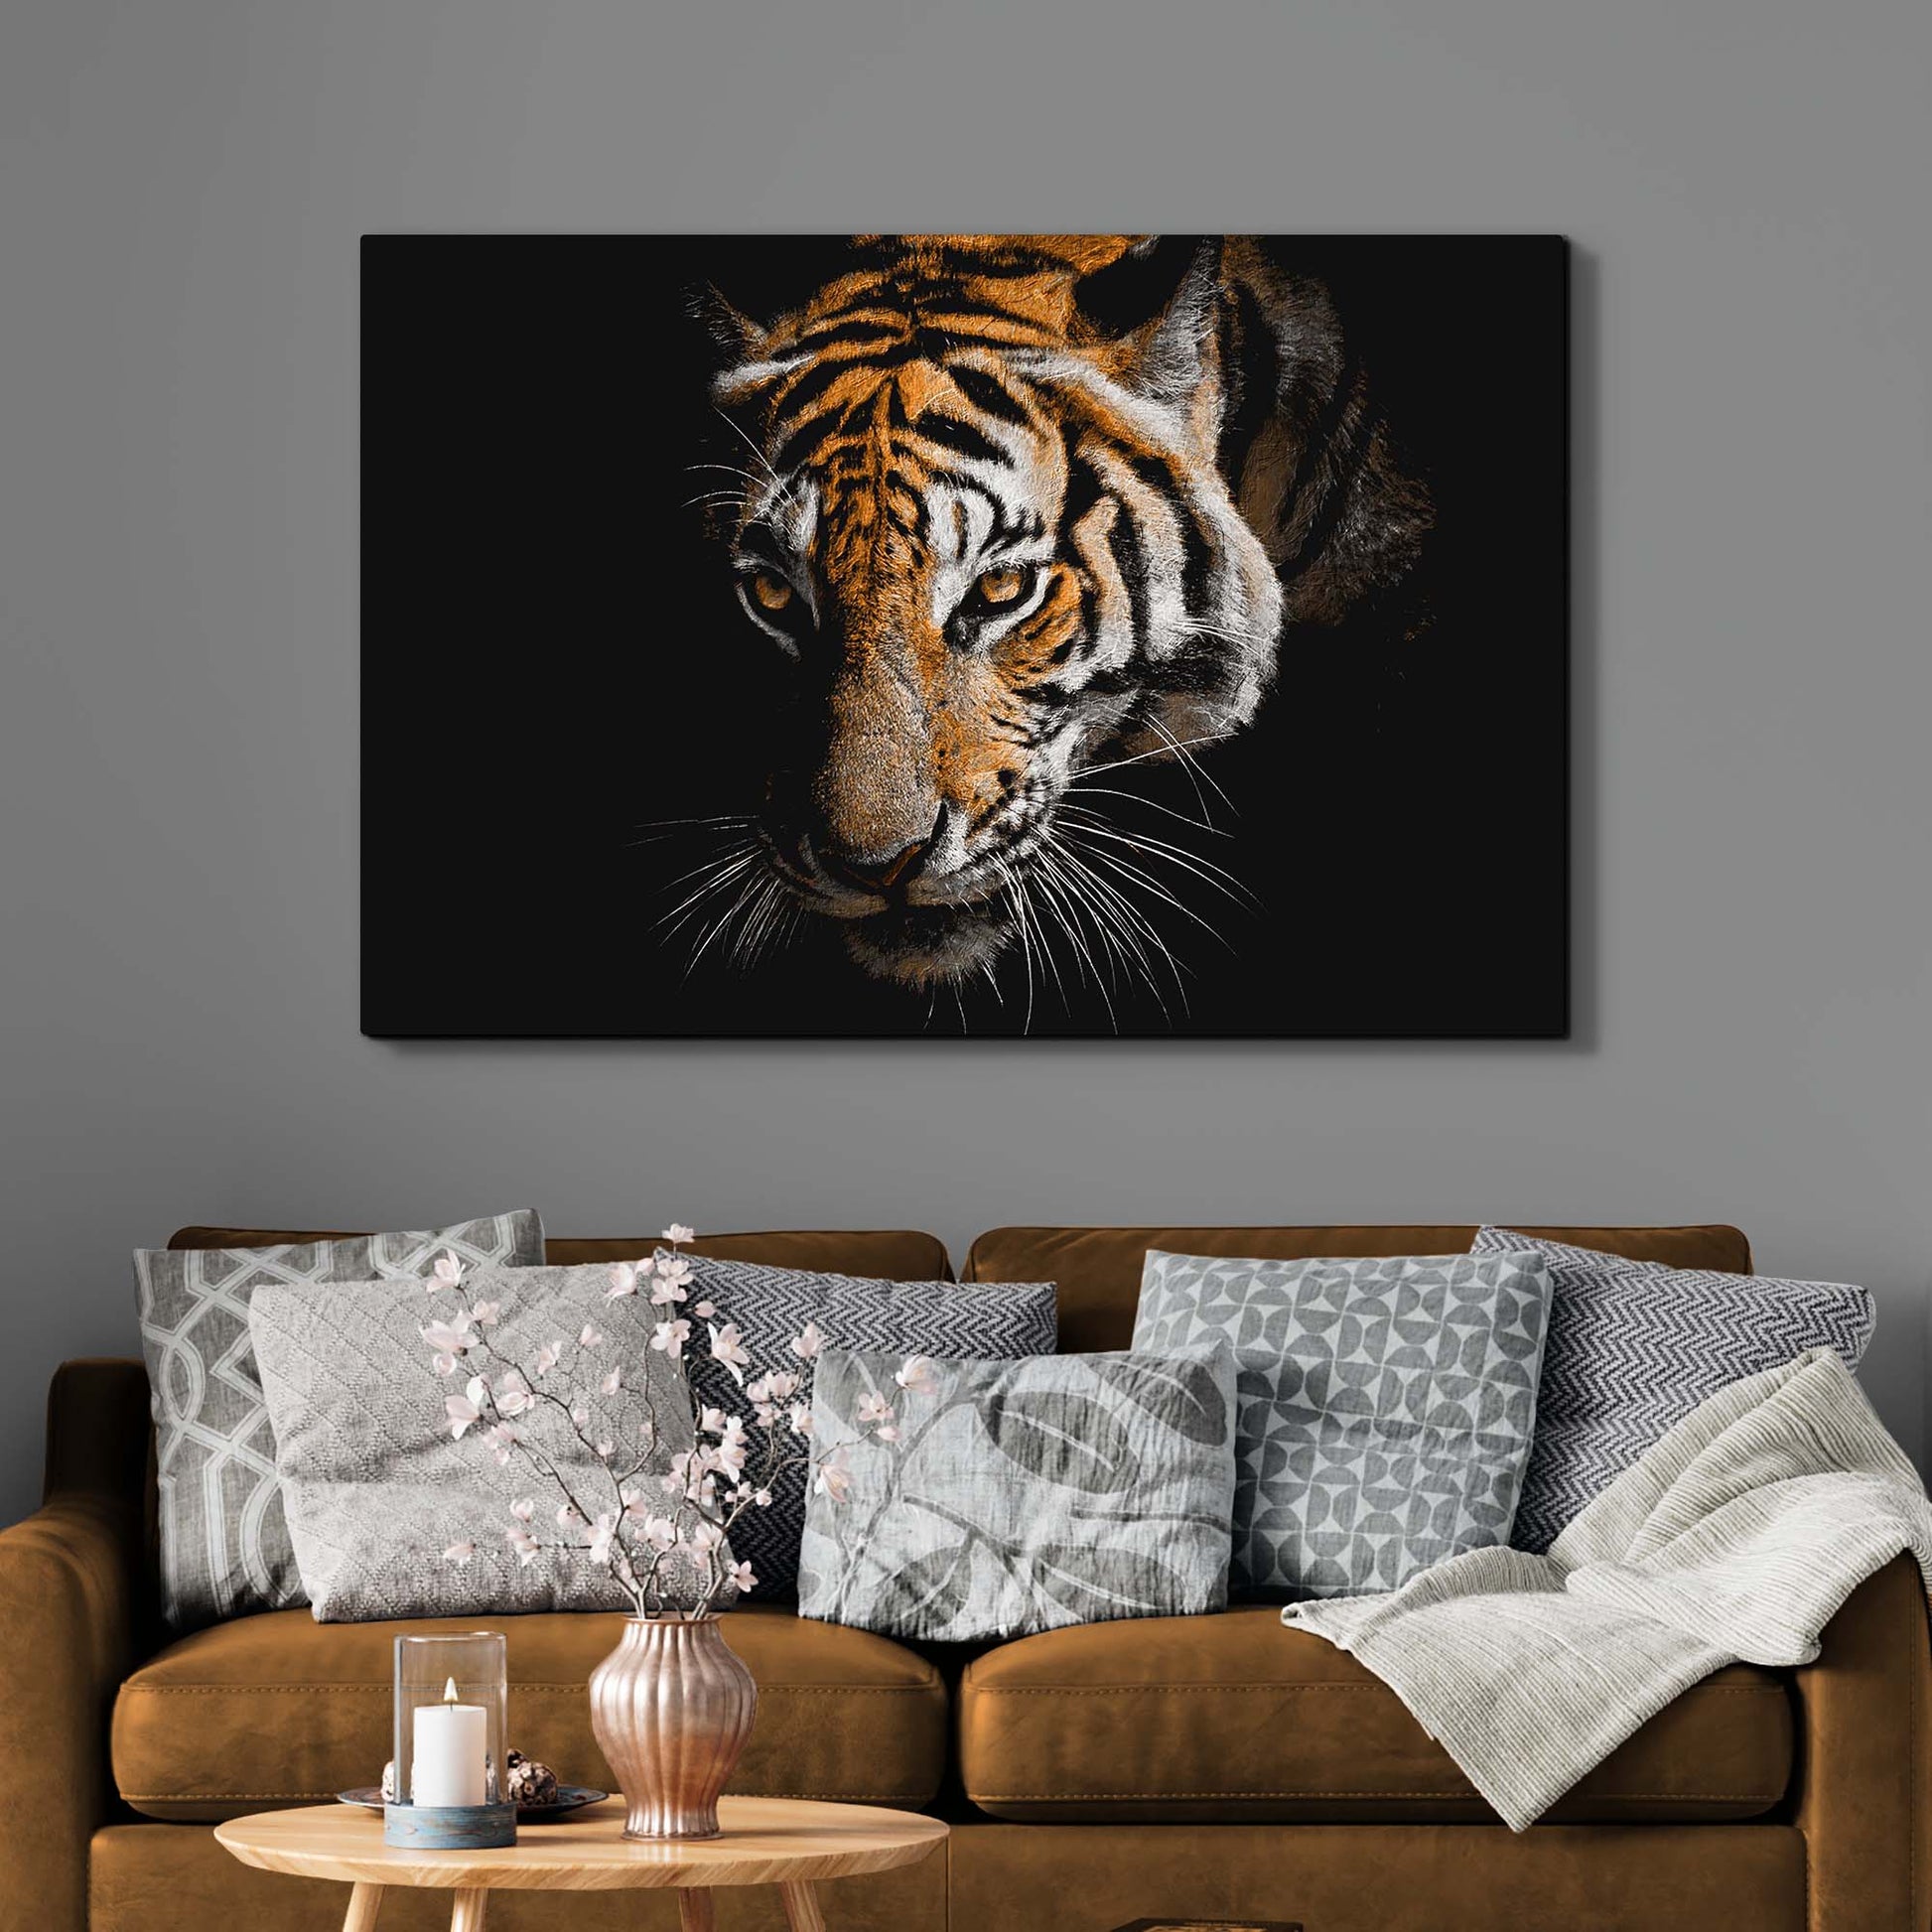 Tiger Watching In The Dark Canvas Wall Art Style 1 - Image by Tailored Canvases